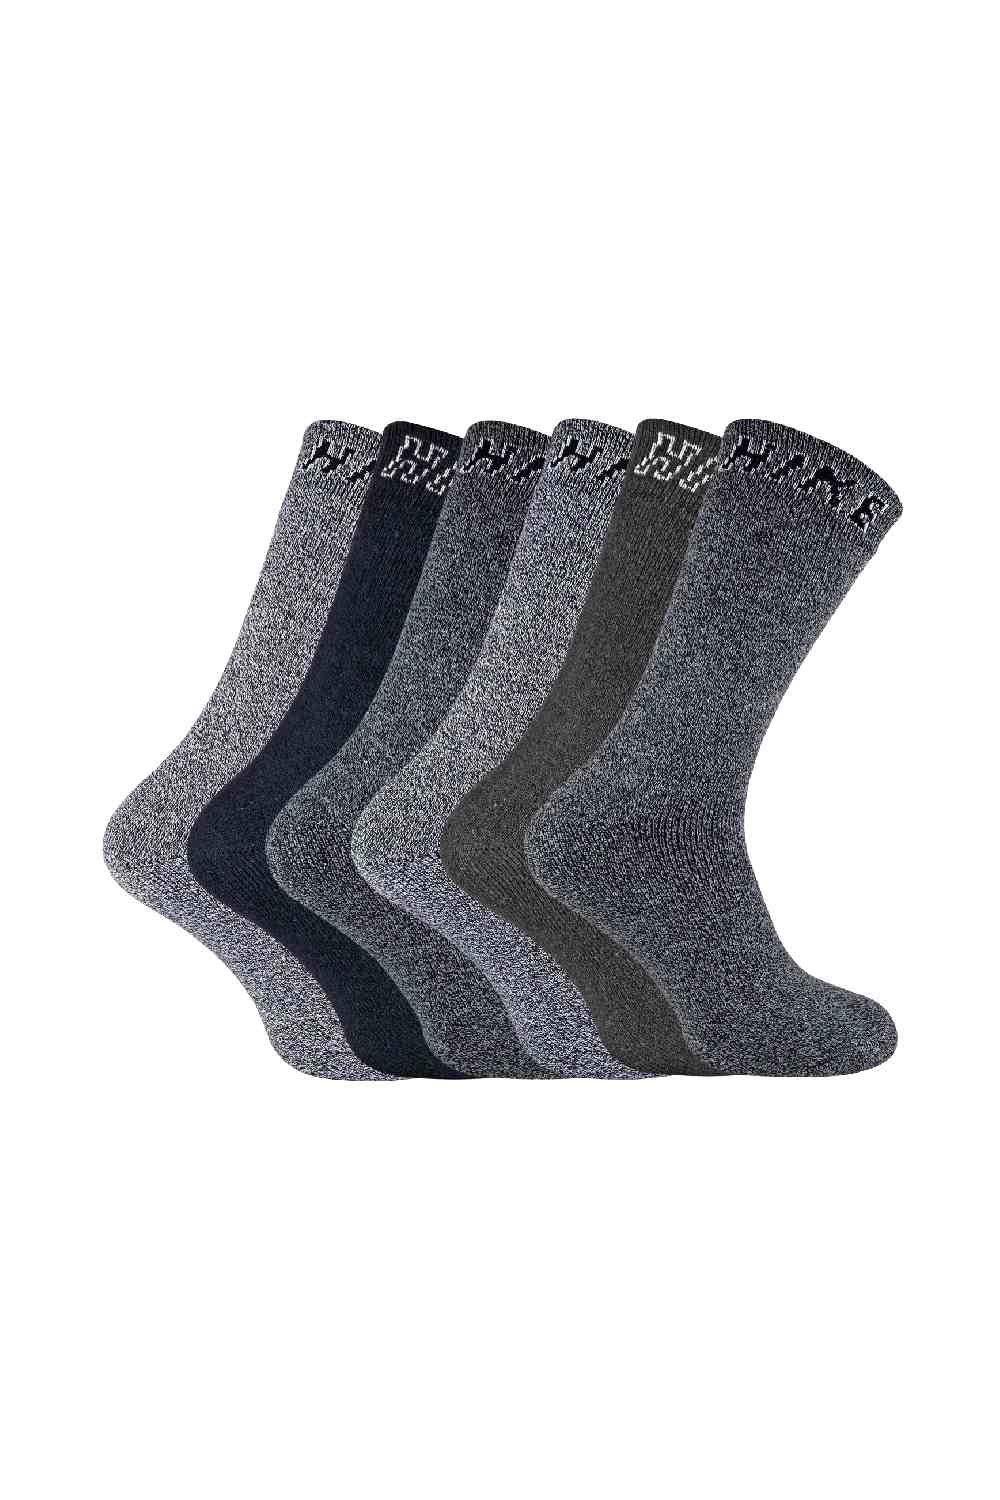 6 Pairs Cushioned Crew Hiking Breathable Walking Boot Socks